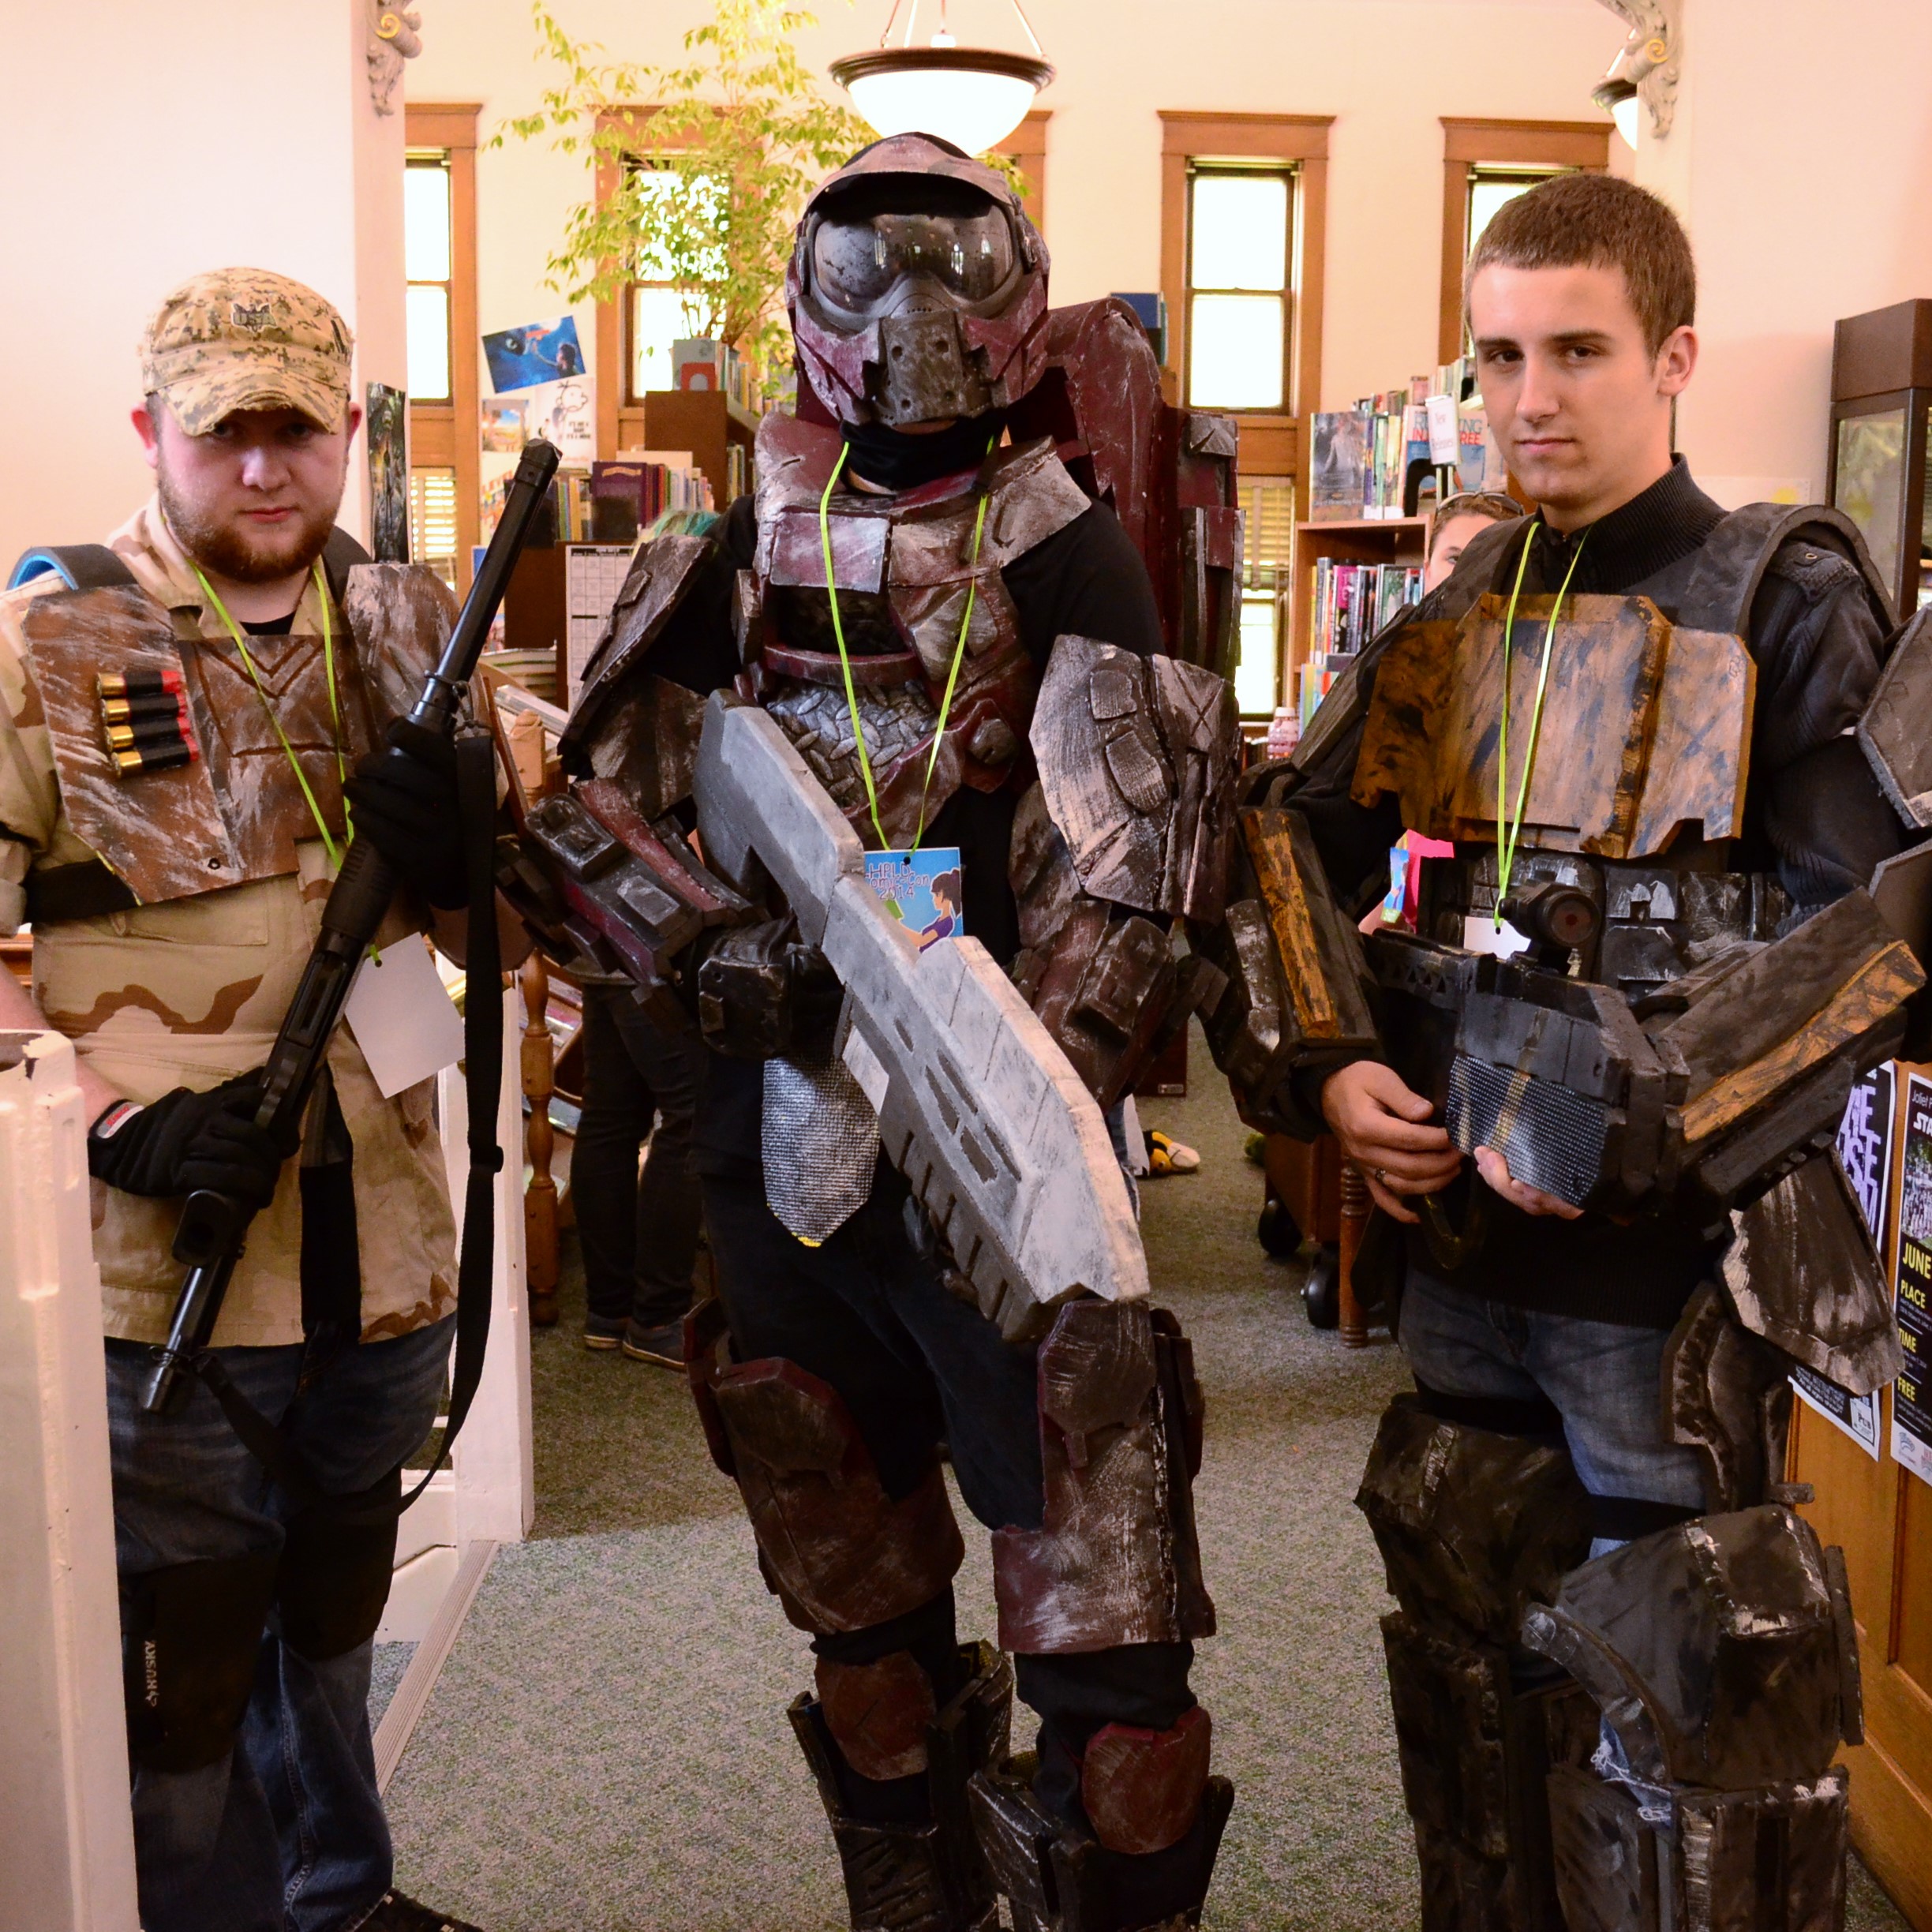 Cosplaying characters from Halo.